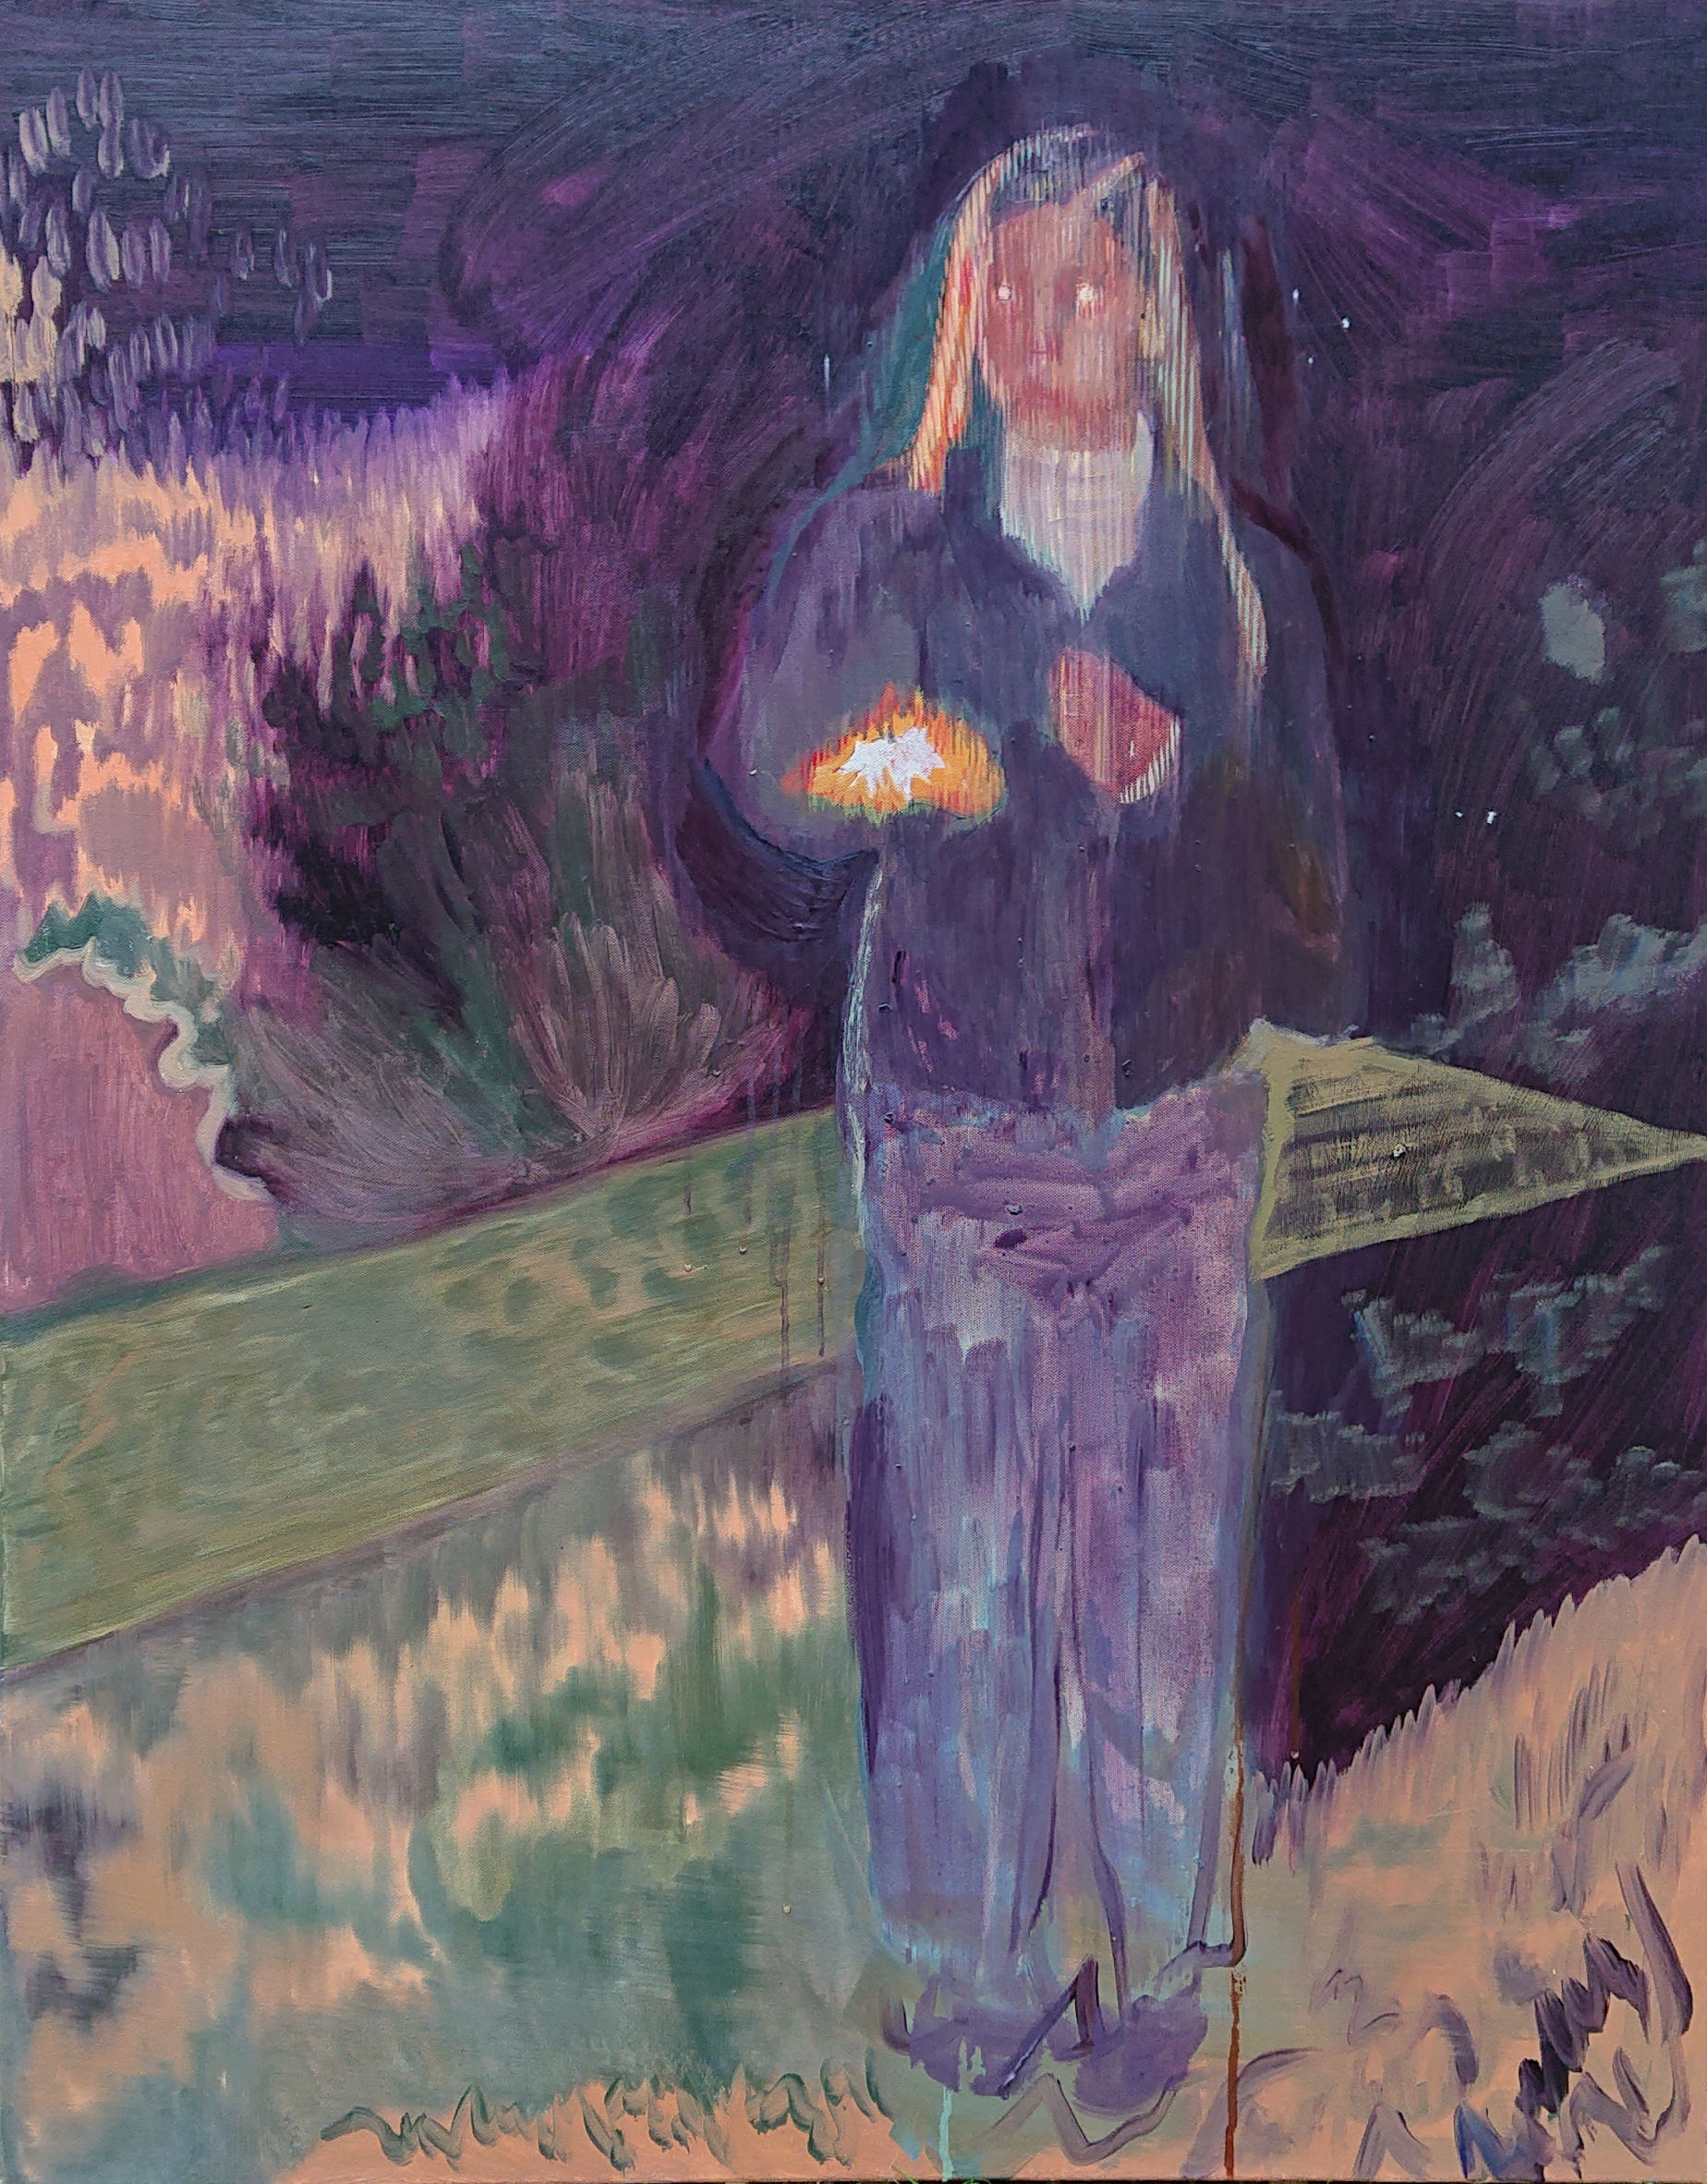 'Figure With A Sparkler', Lucy Cade, Oil on canvas, 100 x 80 cm